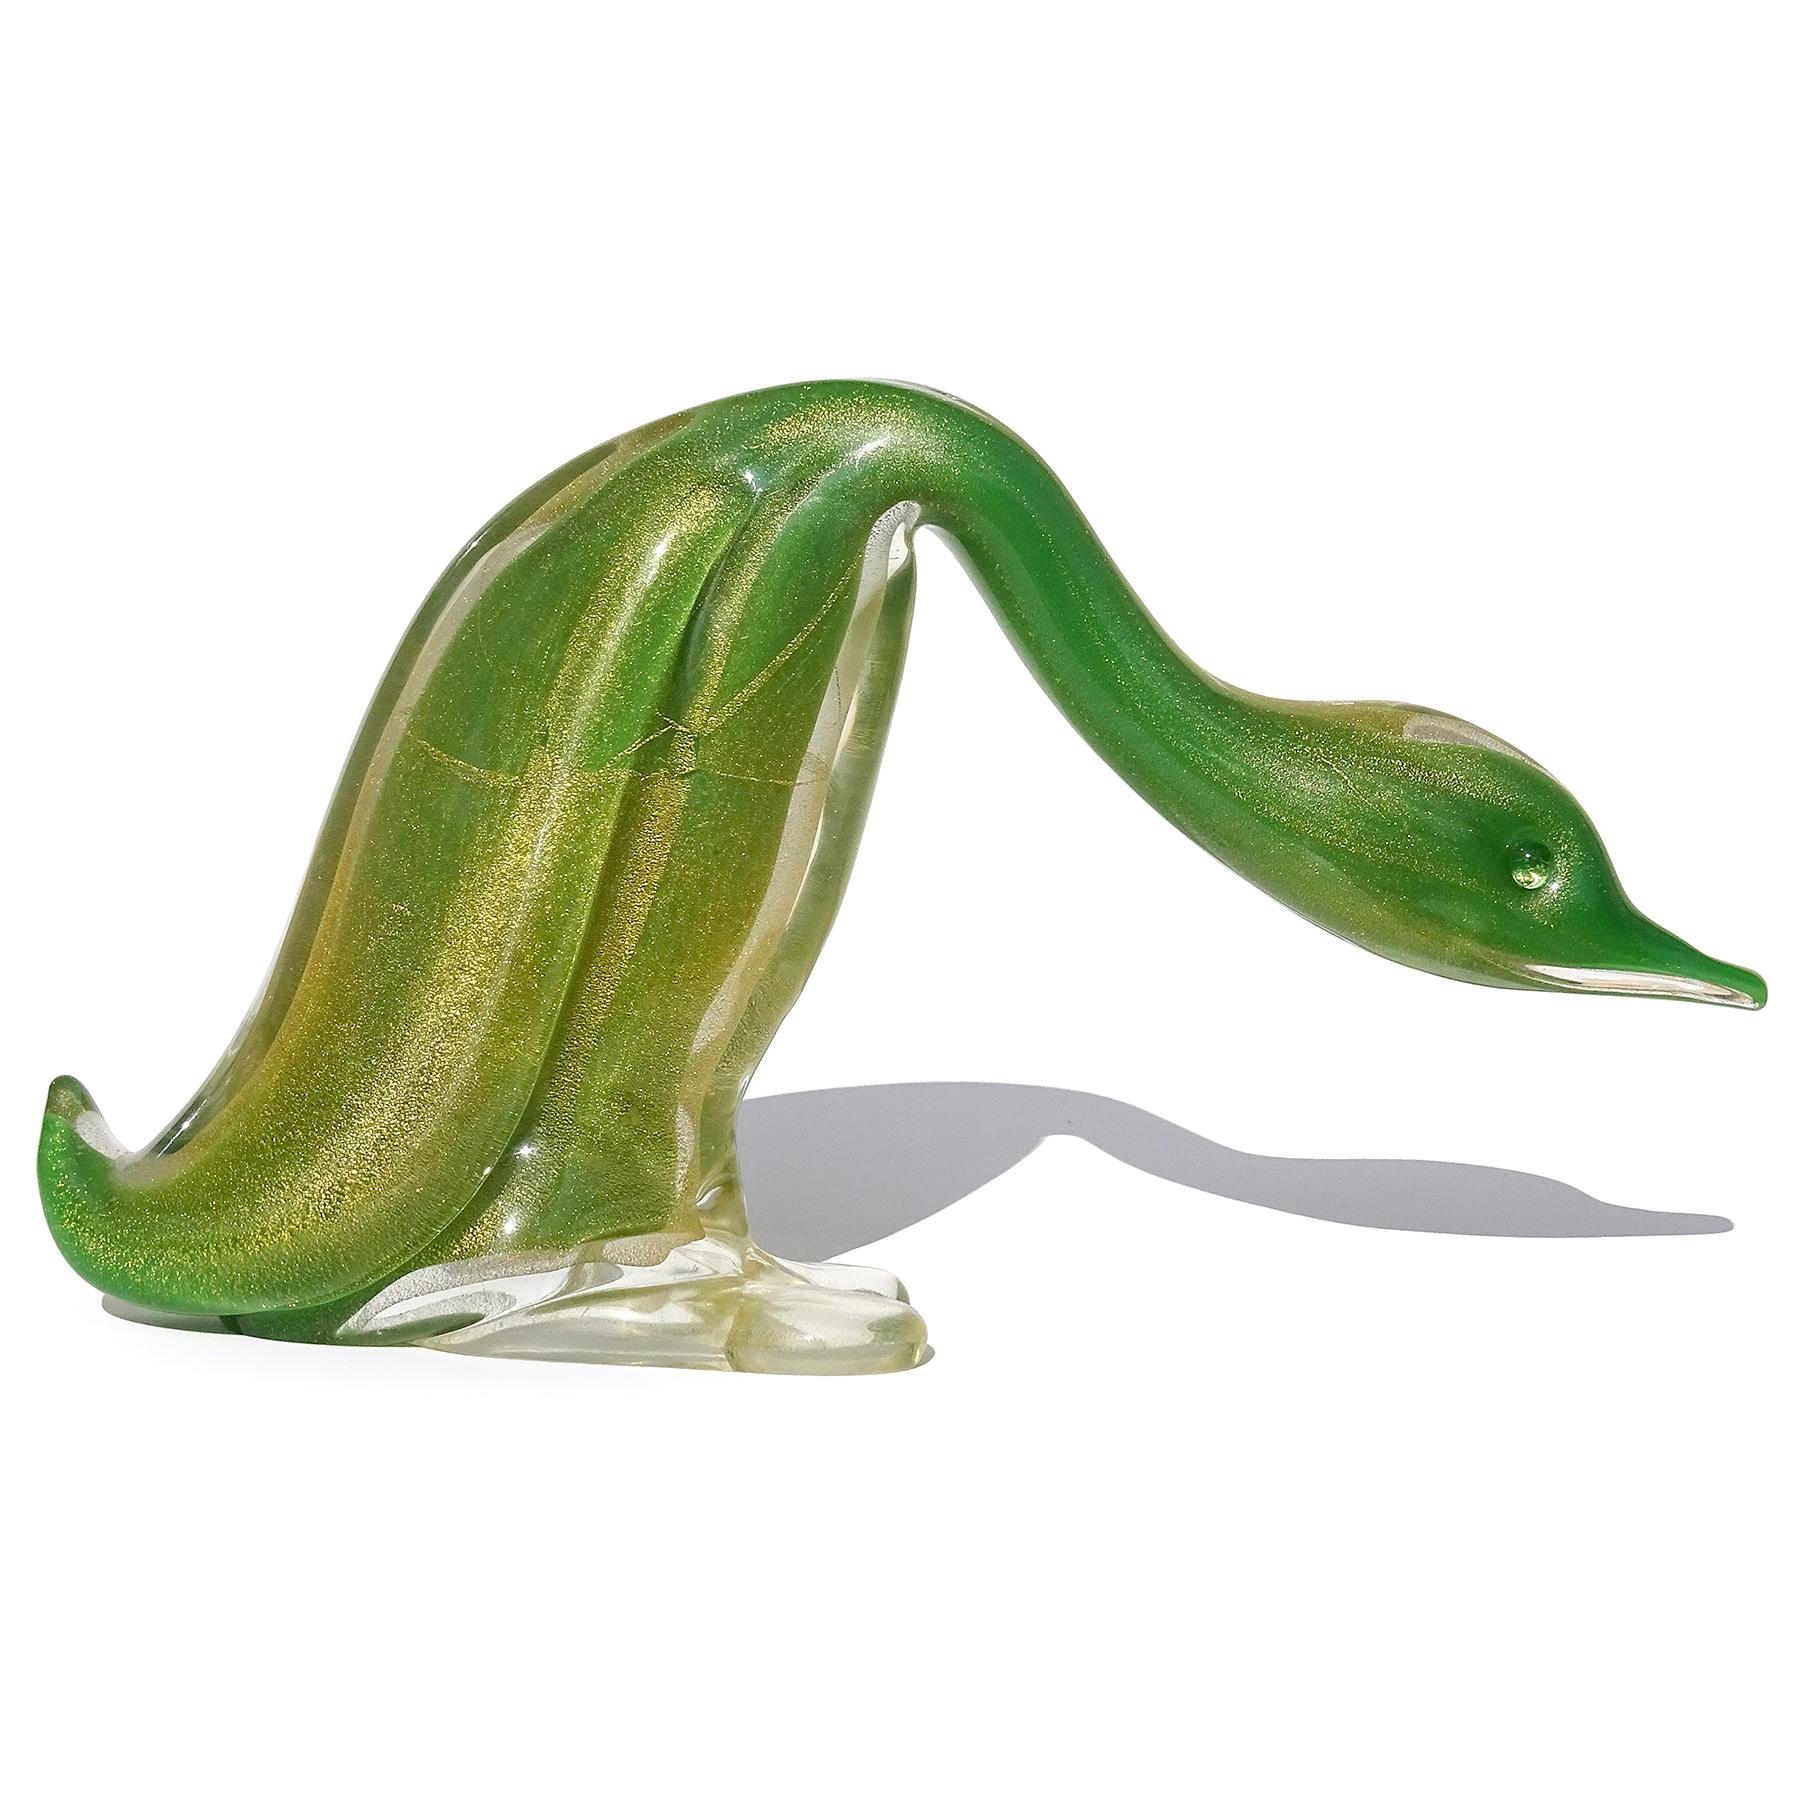 Beautiful, extra large, vintage Murano hand blown green and gold flecks Italian art glass duck bird figure / sculpture. Documented to designer Archimede Seguso. Similar ones are published in the Seguso books. The duck has an inner layer of bright